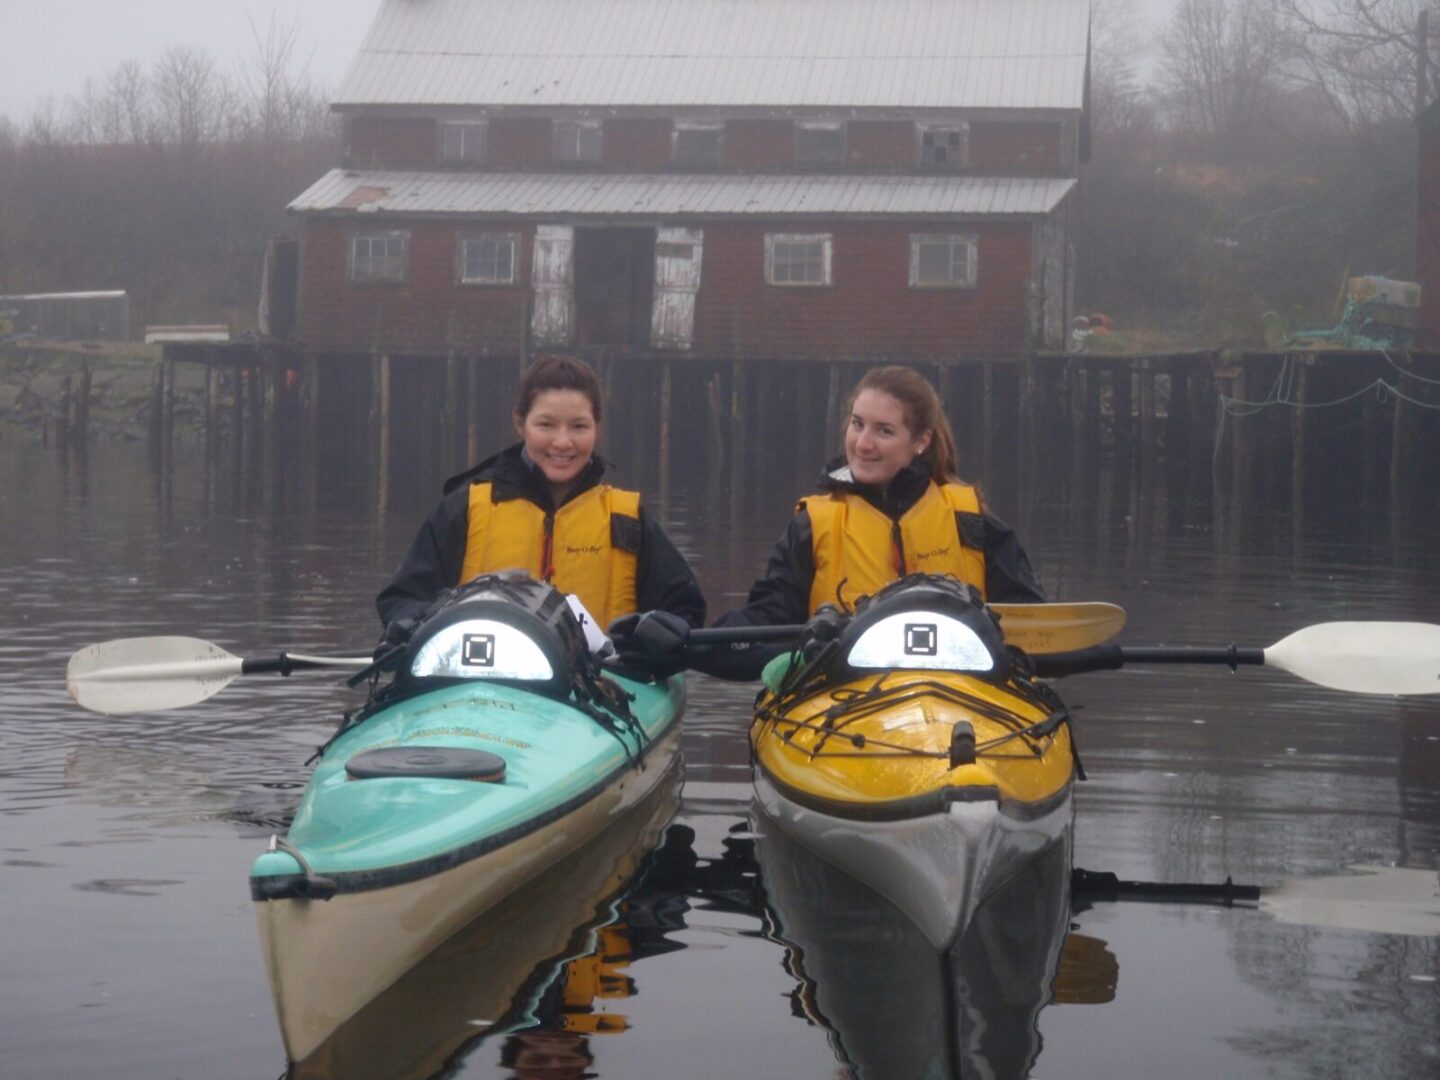 Two women in kayaks on a body of water.